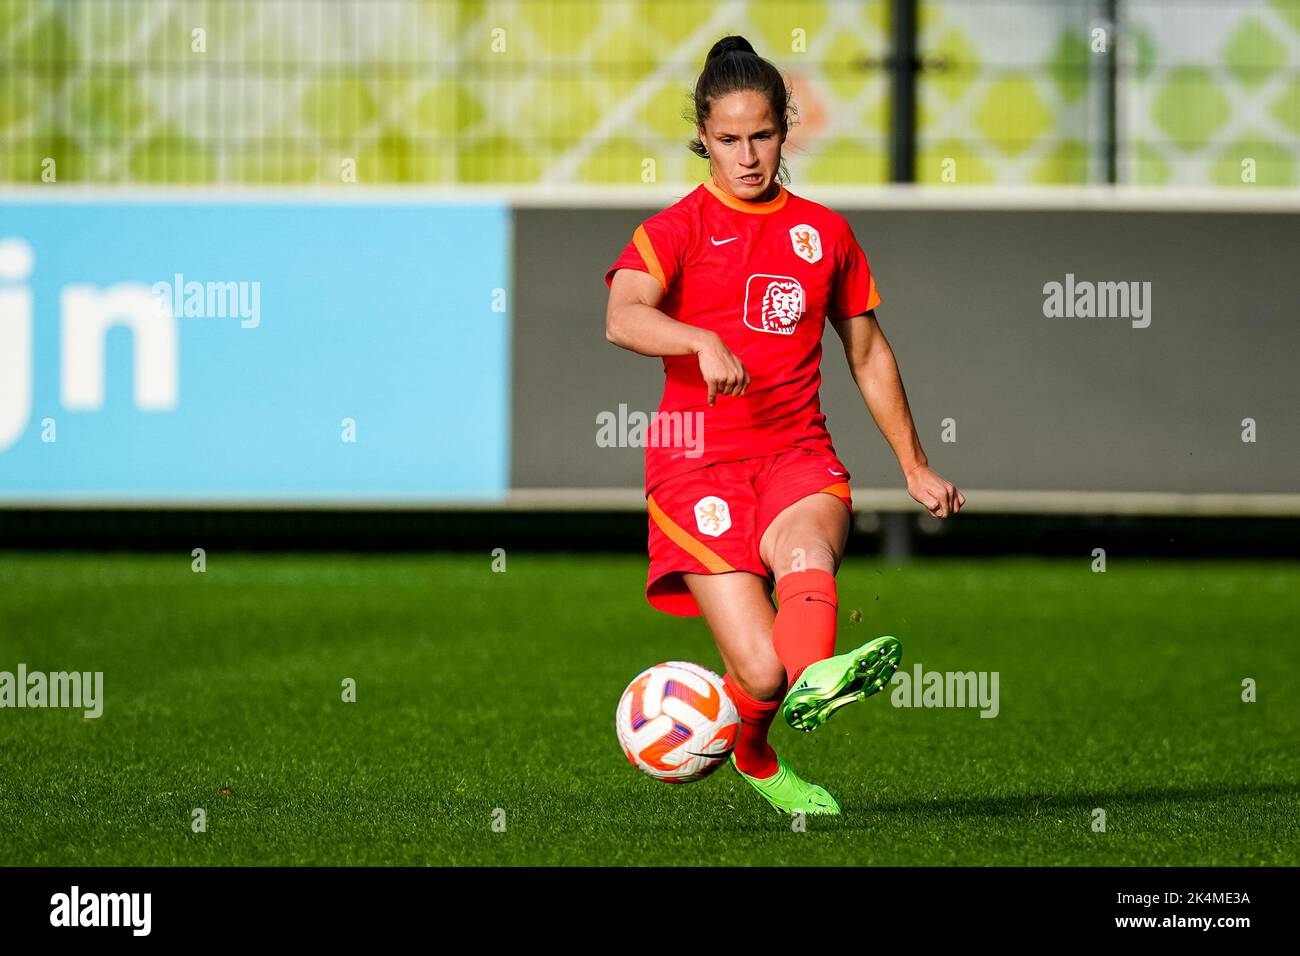 ZEIST, NETHERLANDS - OCTOBER 3: Marisa Olislagers of the Netherlands during a Training Session of the Netherlands Women’s Football Team at the KNVB Campus on October 3, 2022 in Zeist, Netherlands (Photo by Joris Verwijst/Orange Pictures) Stock Photo